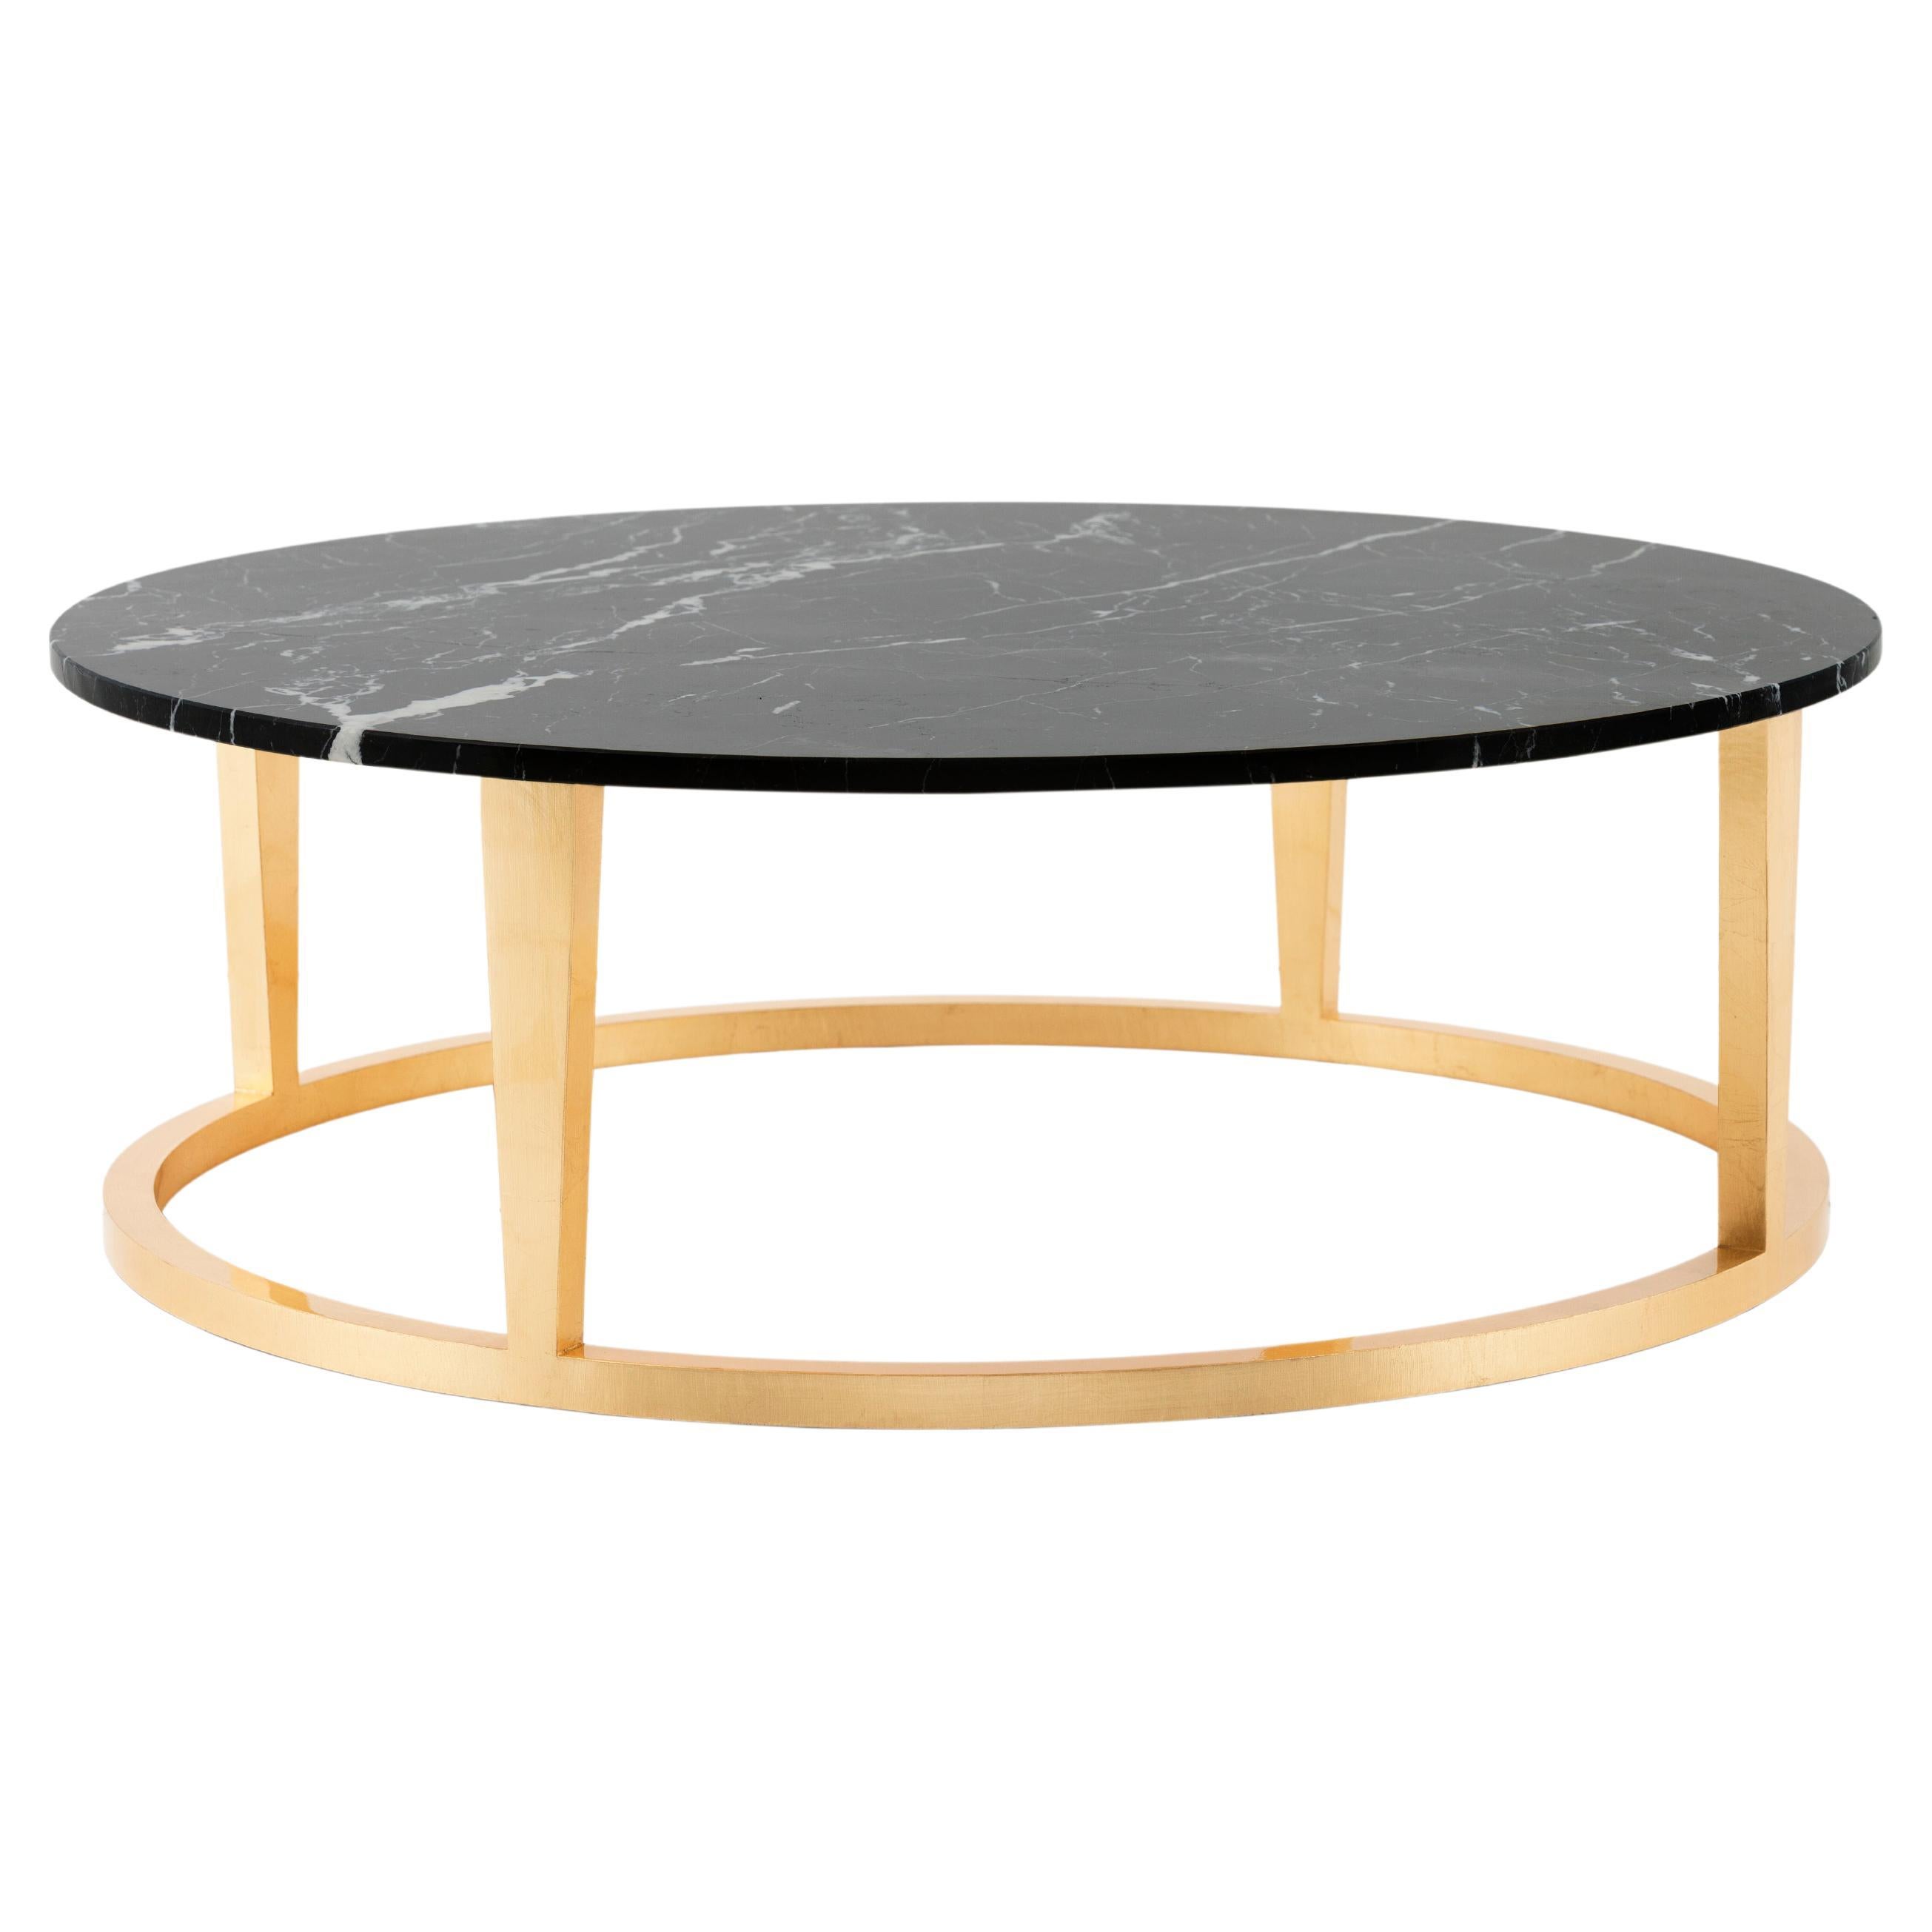 21st Century Art Deco Rubi Coffee Table Handcrafted in Portugal by Greenapple